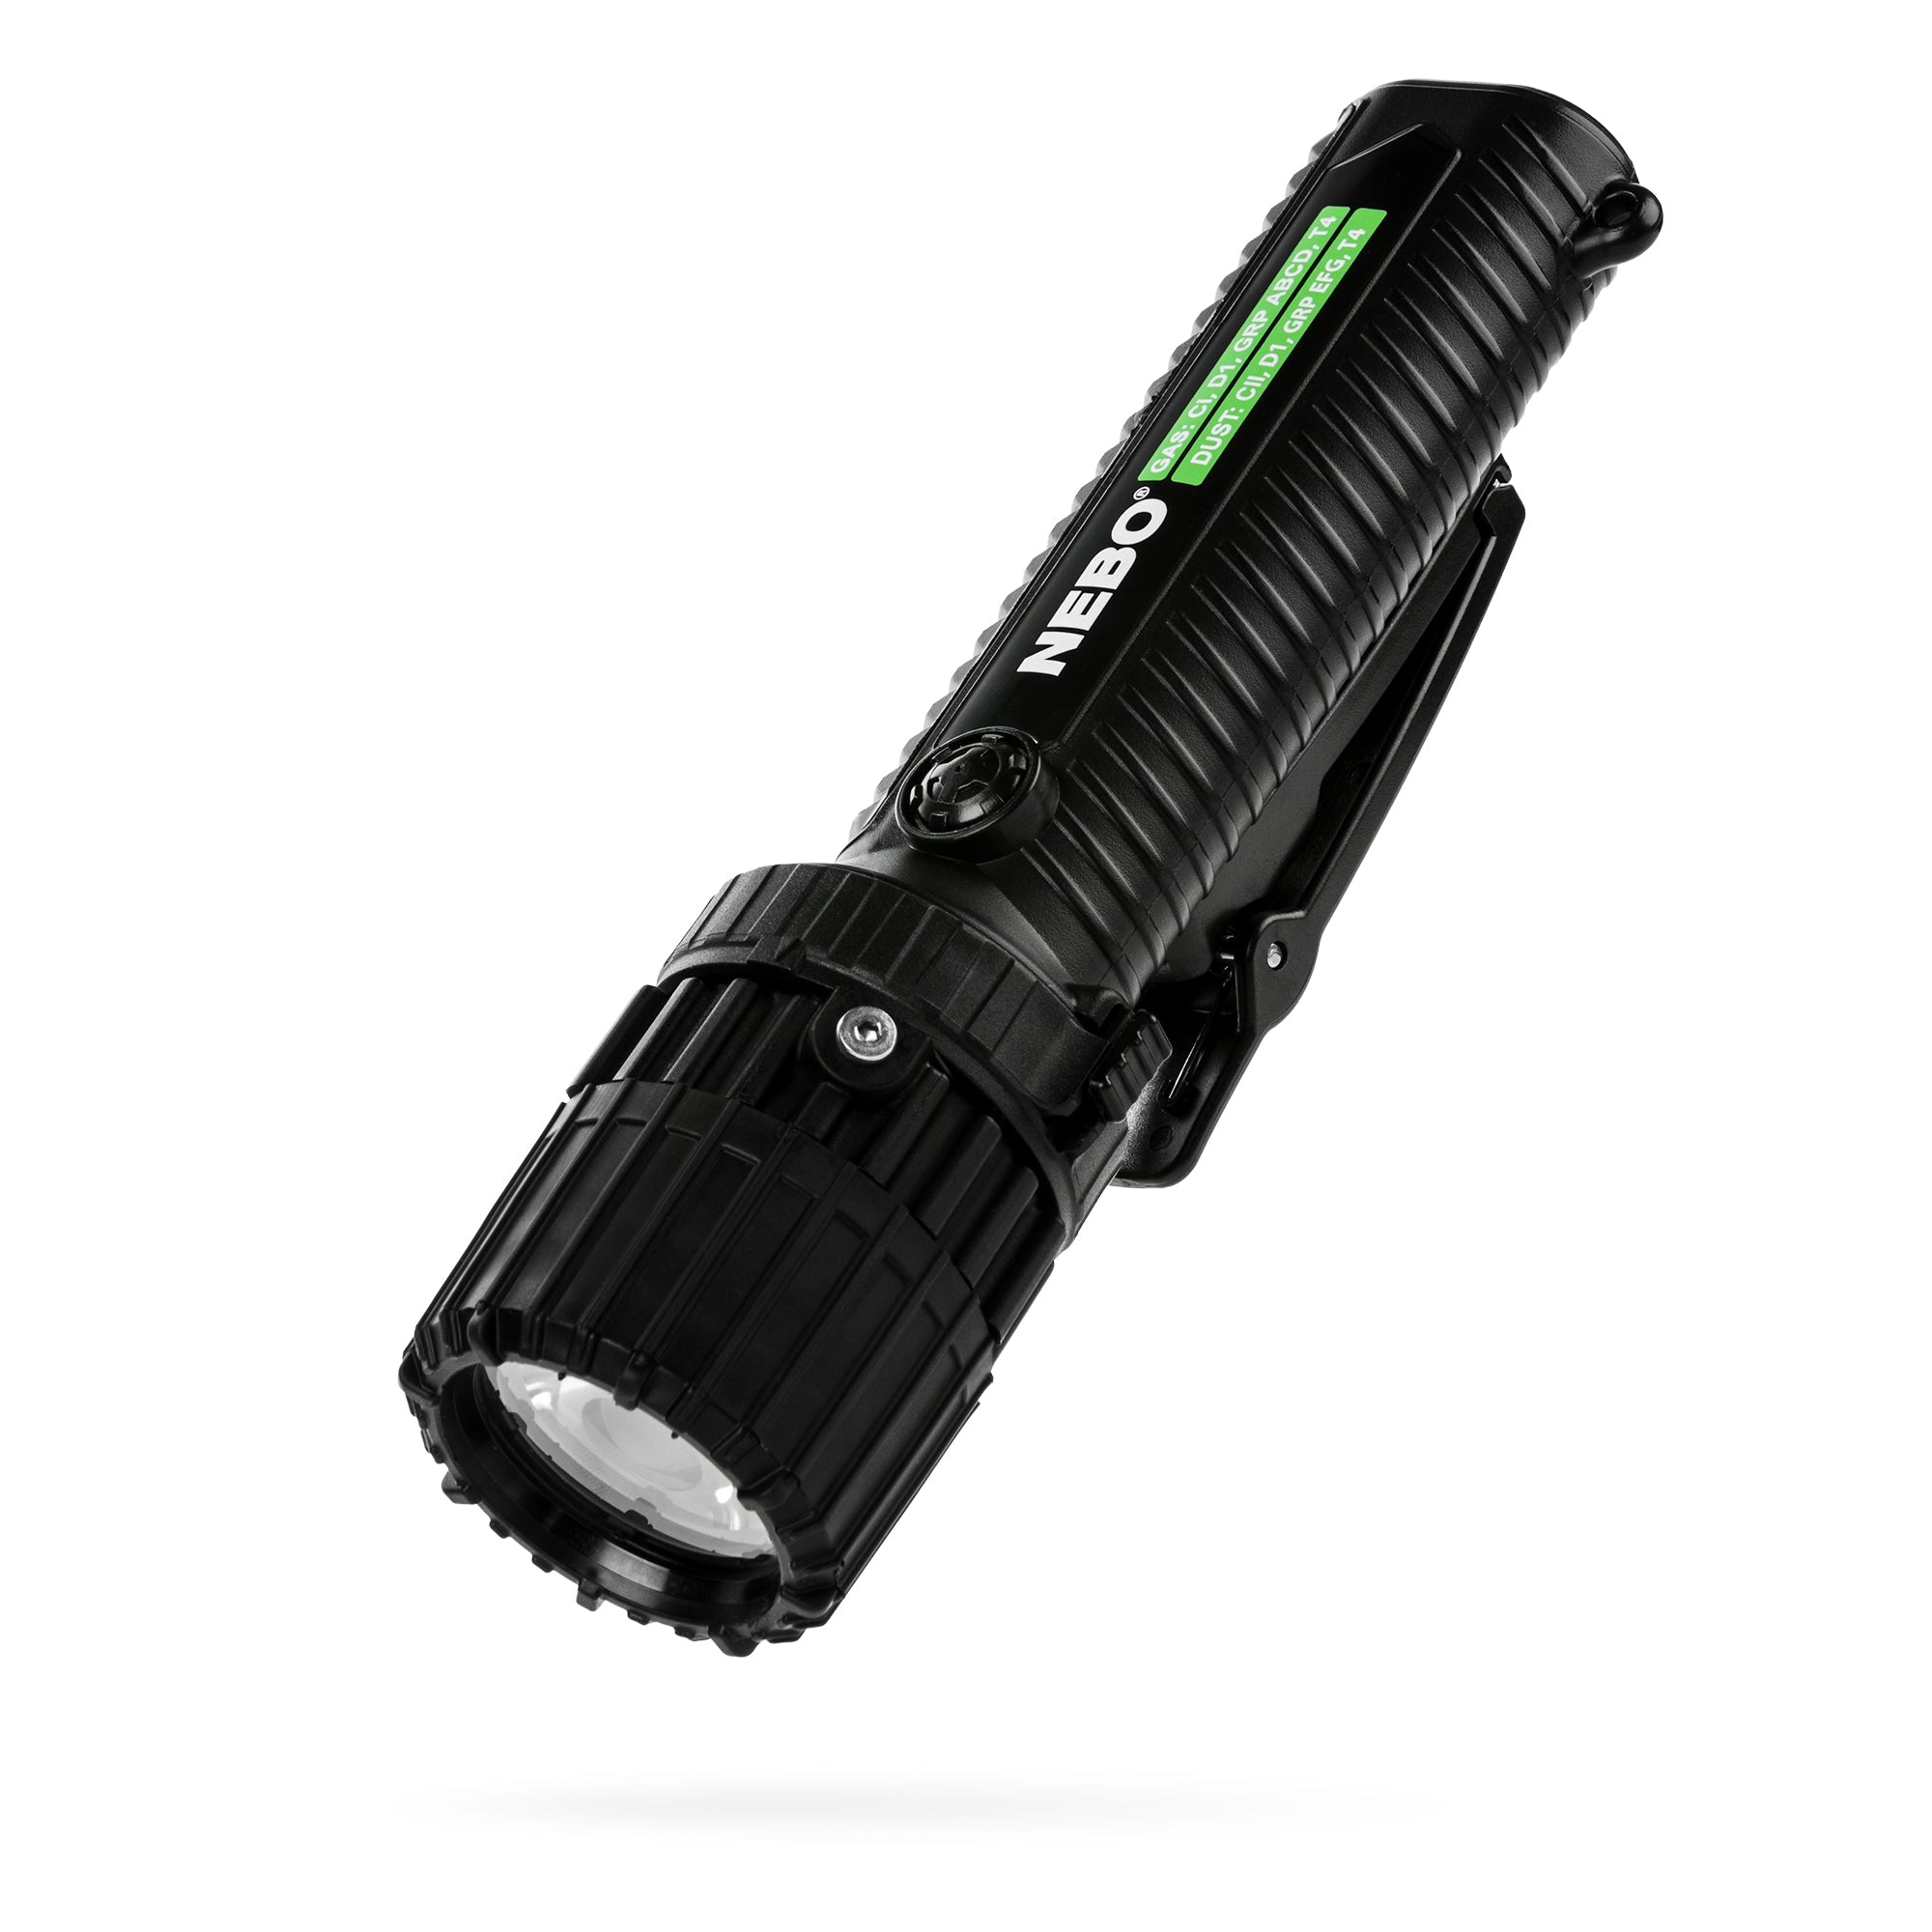 Certified Intrinsically Safe Focusable LED Flashlight - Sonic Electric